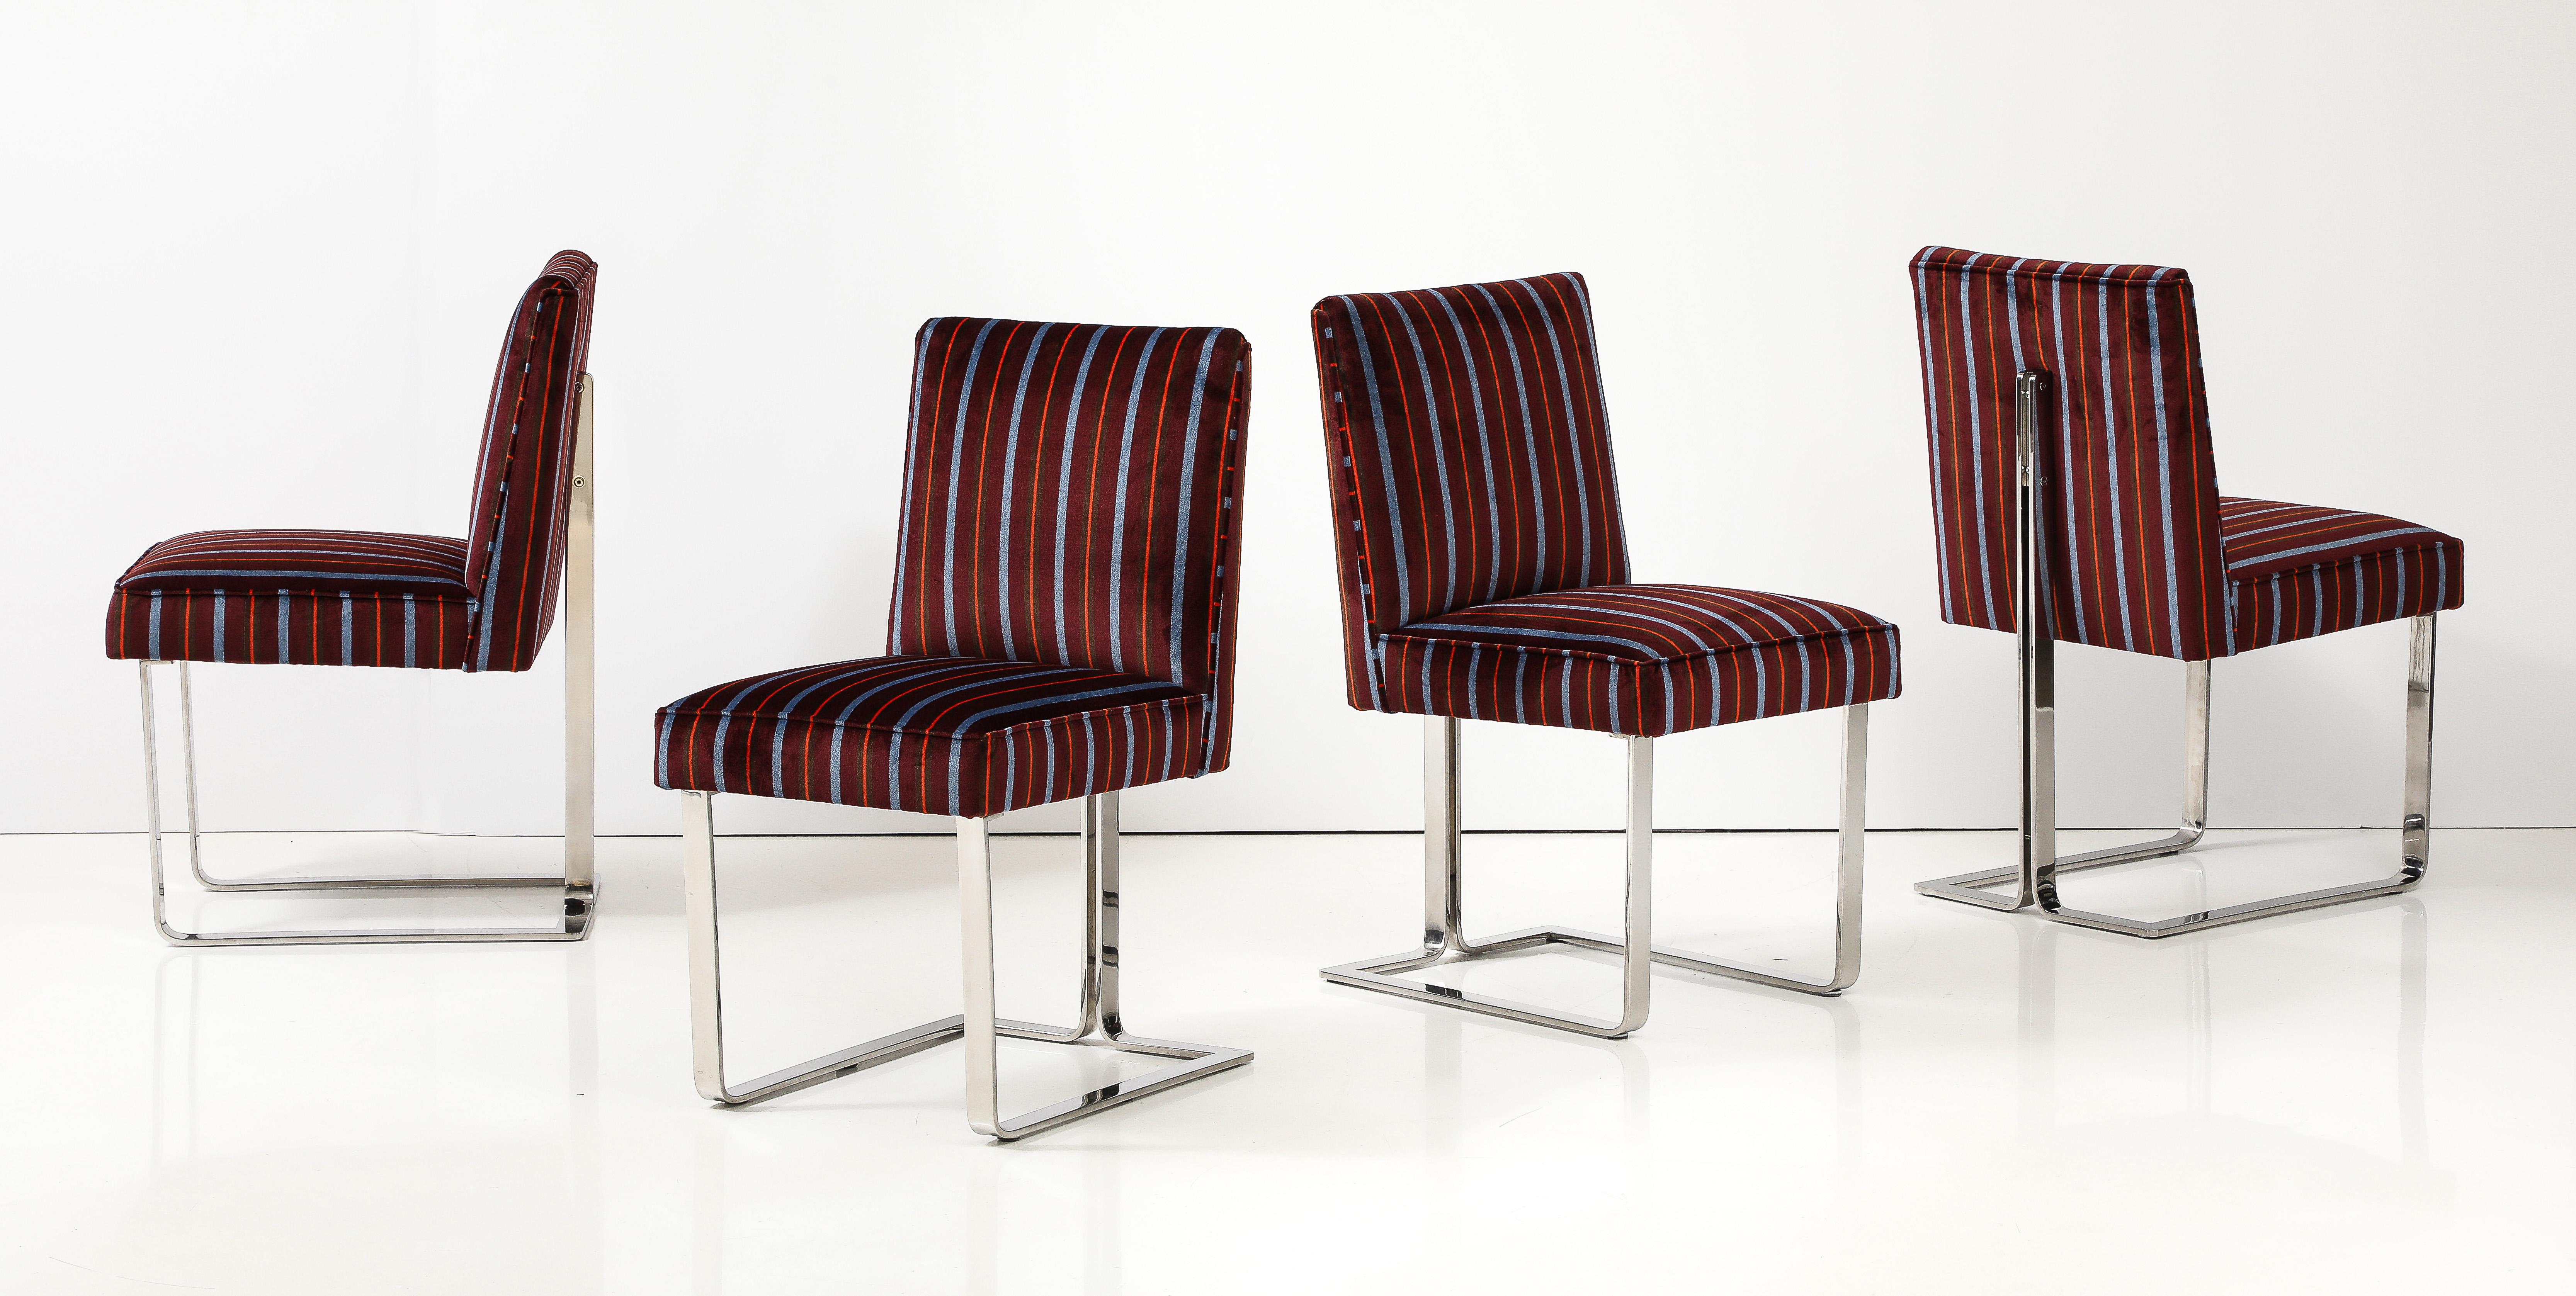 Amazing set of 8 solid steel dining chairs designed by Vladimir Kagan for Kagan-Dreyfuss in the 1960's newly-re-upholstered in Donghia velvet fabric, in vintage condition with minor wear and patina due to age and use, the chairs are well made and